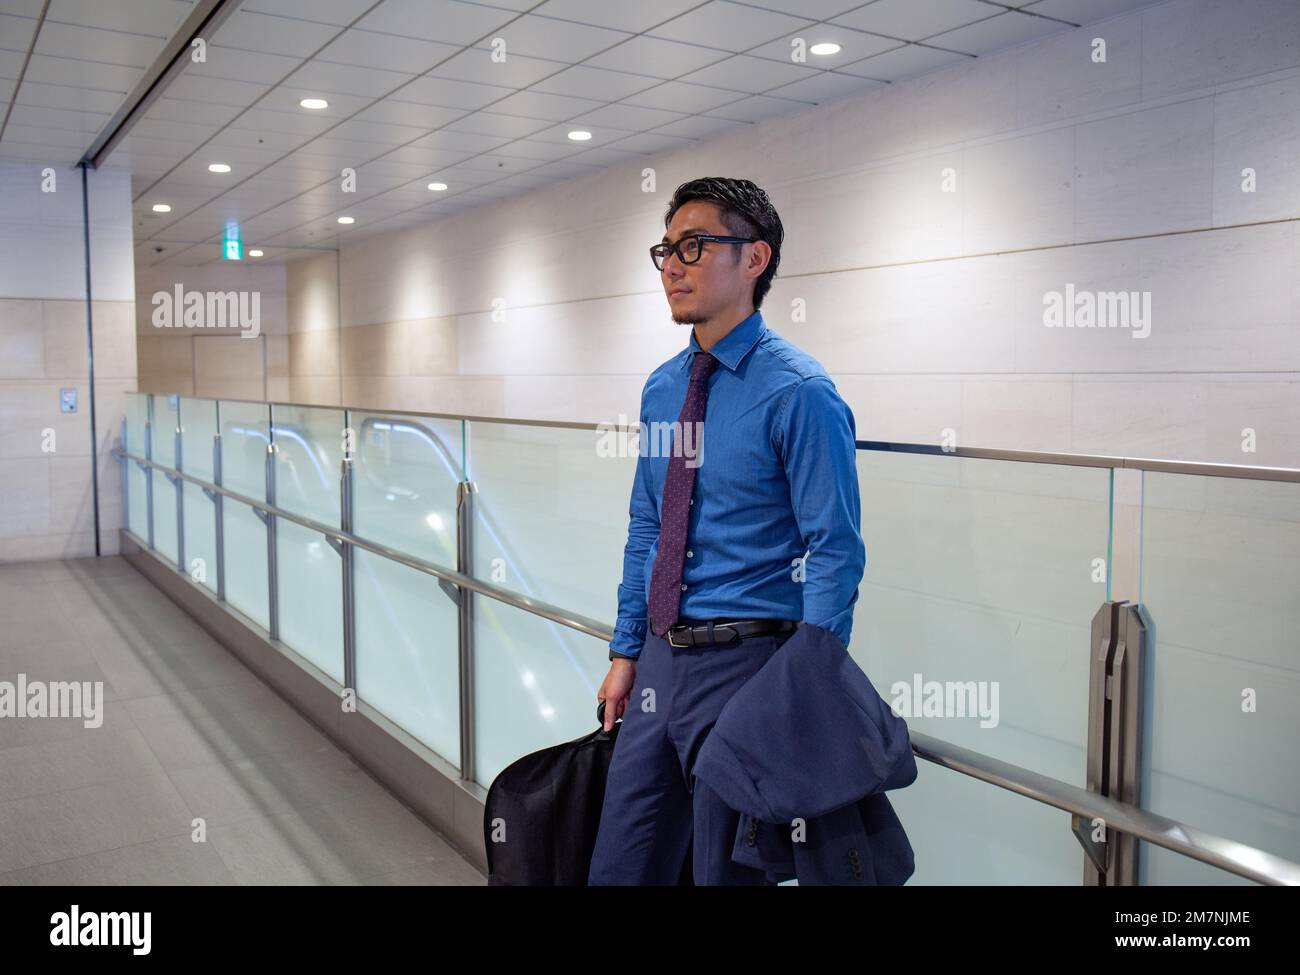 A young businessman in the city, on the move, standing holding a laptop bag and coat. Stock Photo